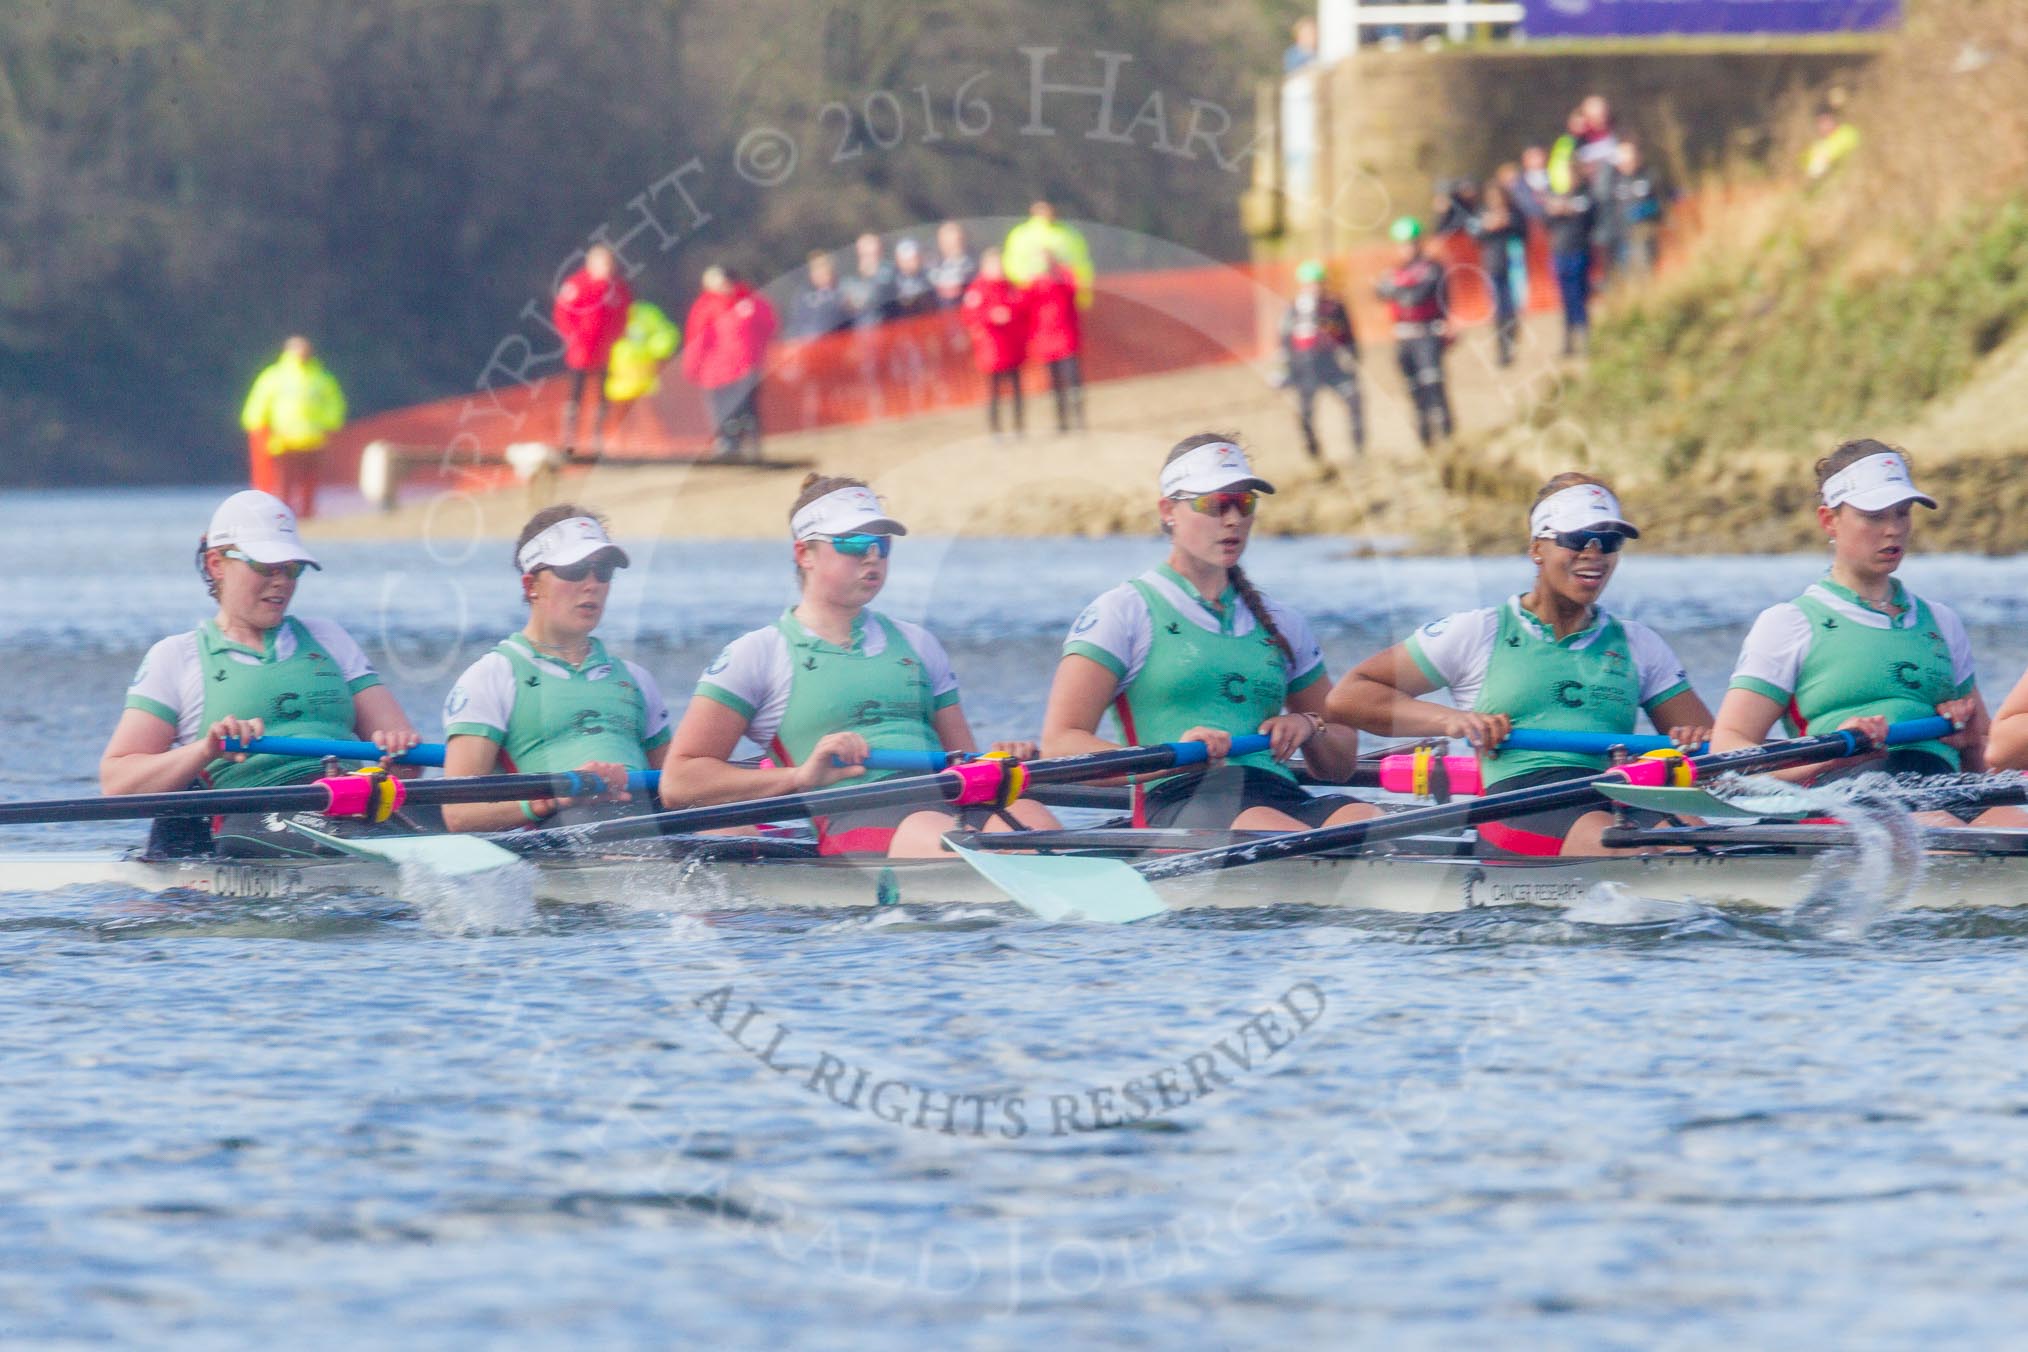 The Boat Race season 2016 -  The Cancer Research Women's Boat Race.
River Thames between Putney Bridge and Mortlake,
London SW15,

United Kingdom,
on 27 March 2016 at 14:33, image #312